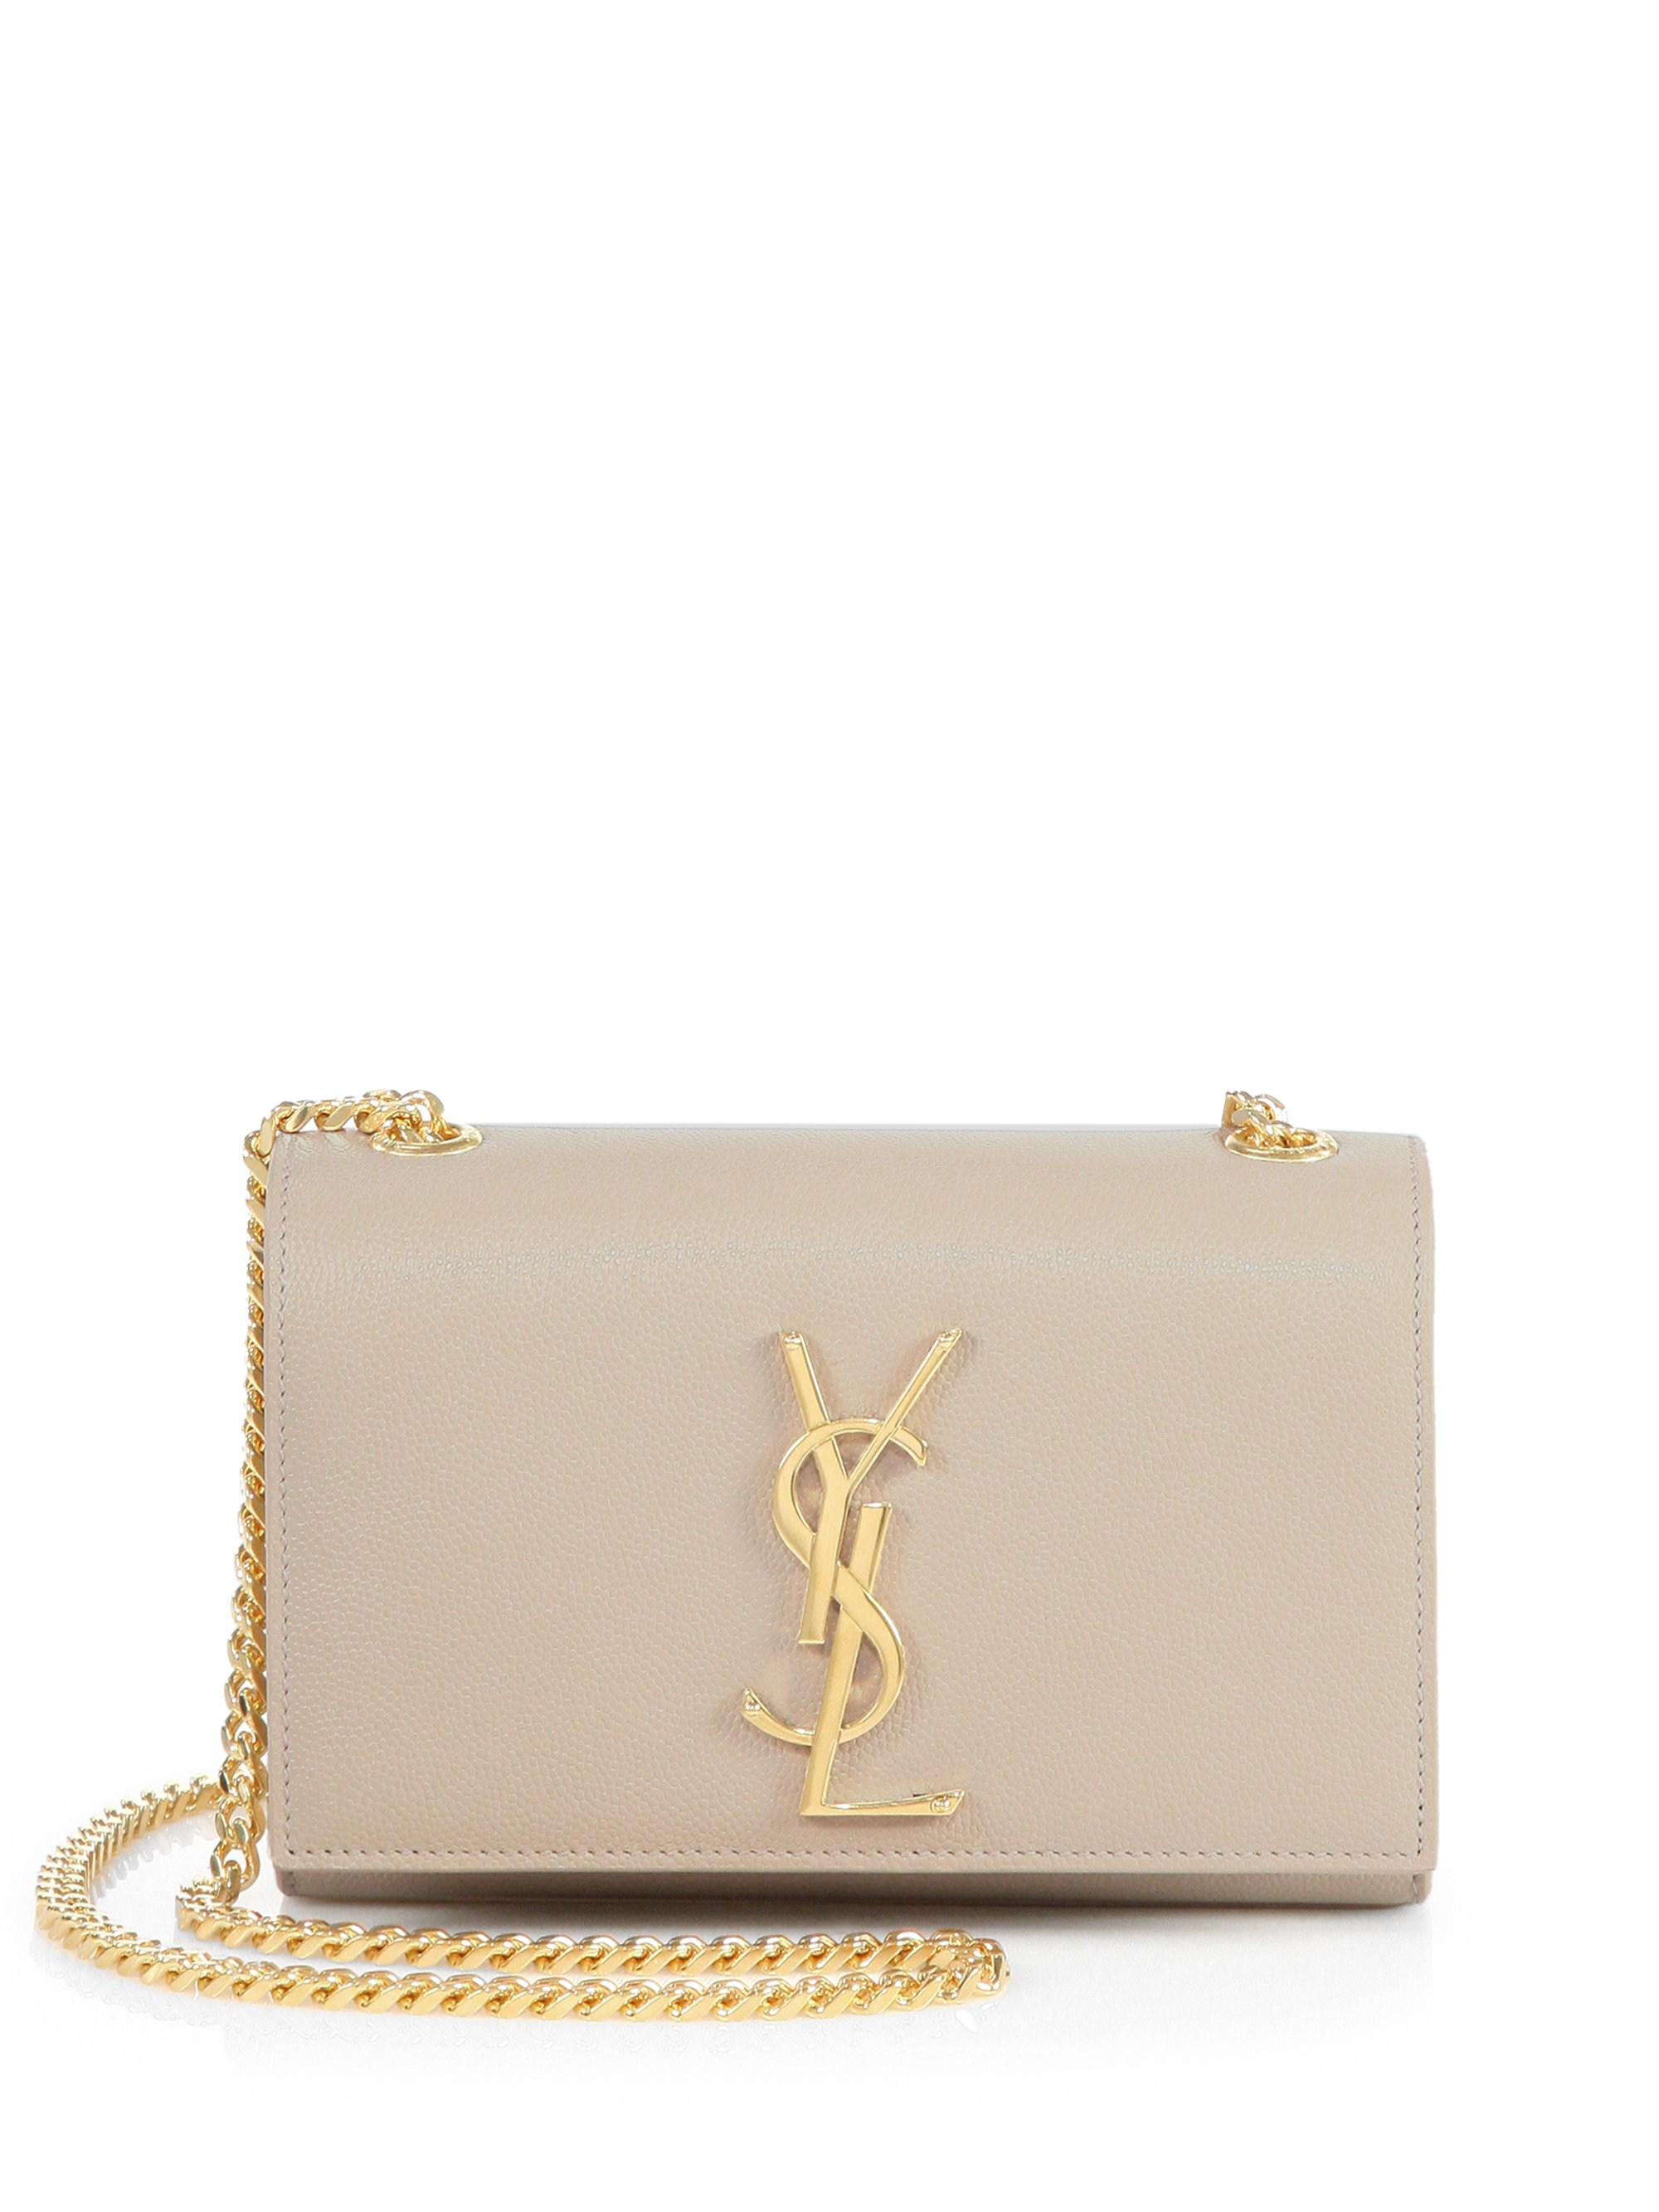 Saint Laurent Women's Small Kate Monogram Leather Chain Shoulder Bag - Nude  in Natural | Lyst